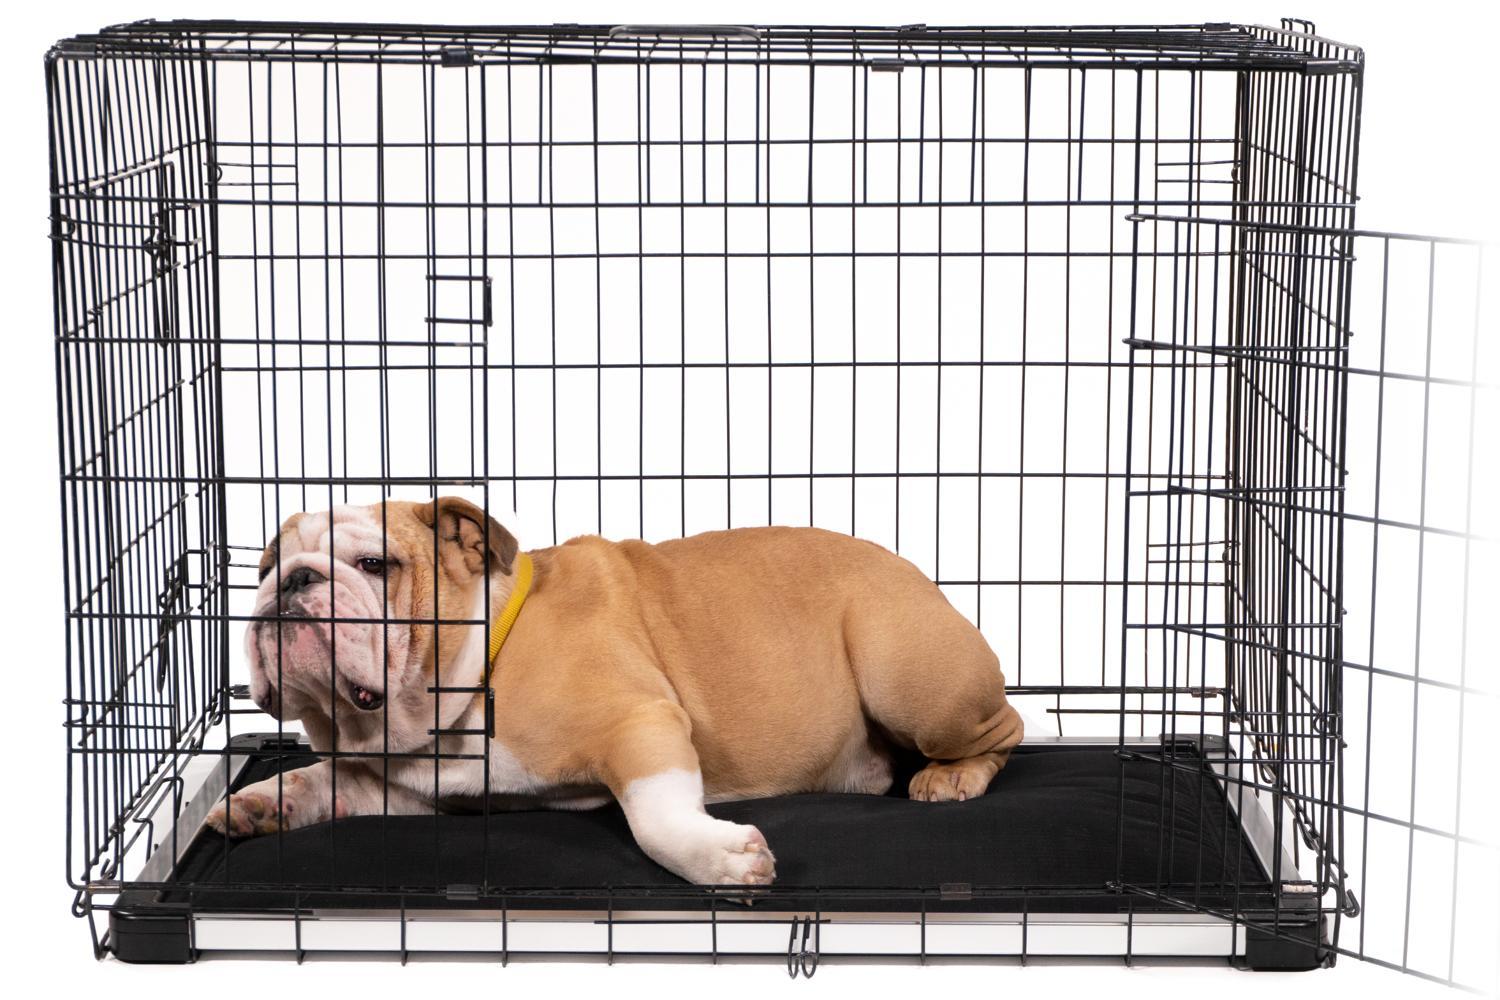 dog crate mats for chewers